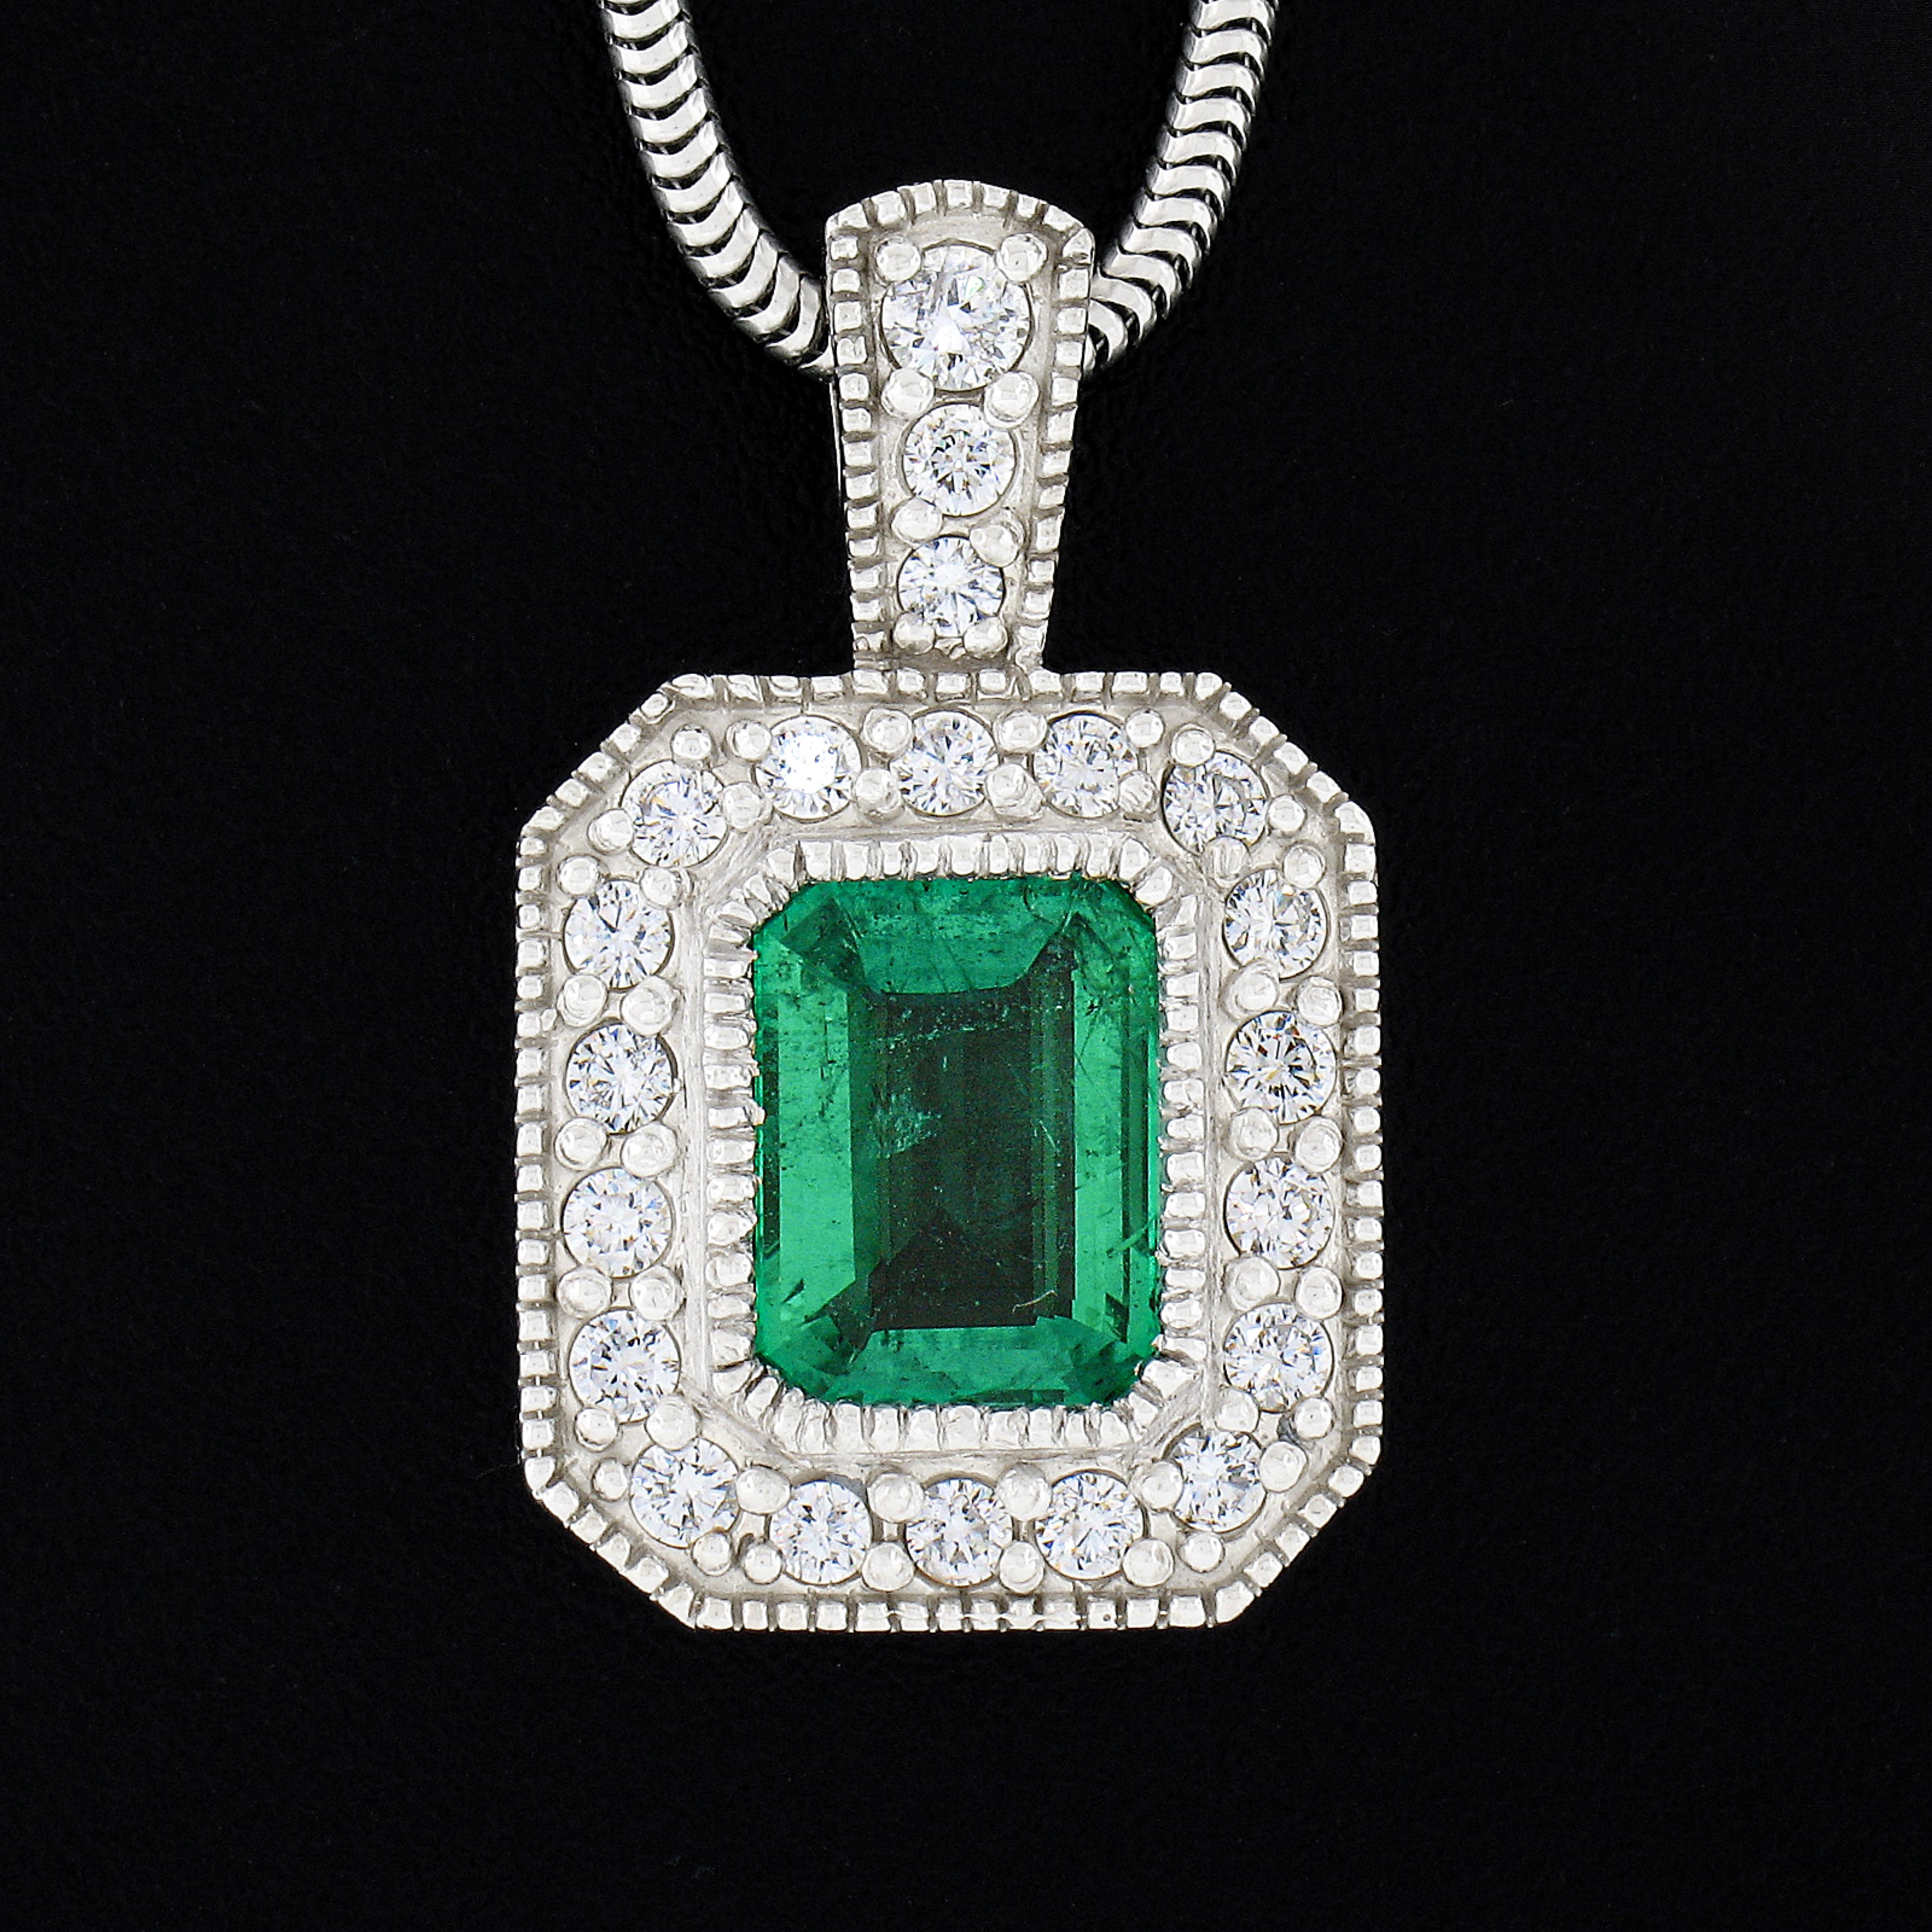 Here we have an absolutely magnificent and truly jaw dropping pendant that is crafted from solid 14k white gold that carries a gorgeous, GIA certified, natural emerald stone surrounded by a super fiery diamonds throughout. The incredible center